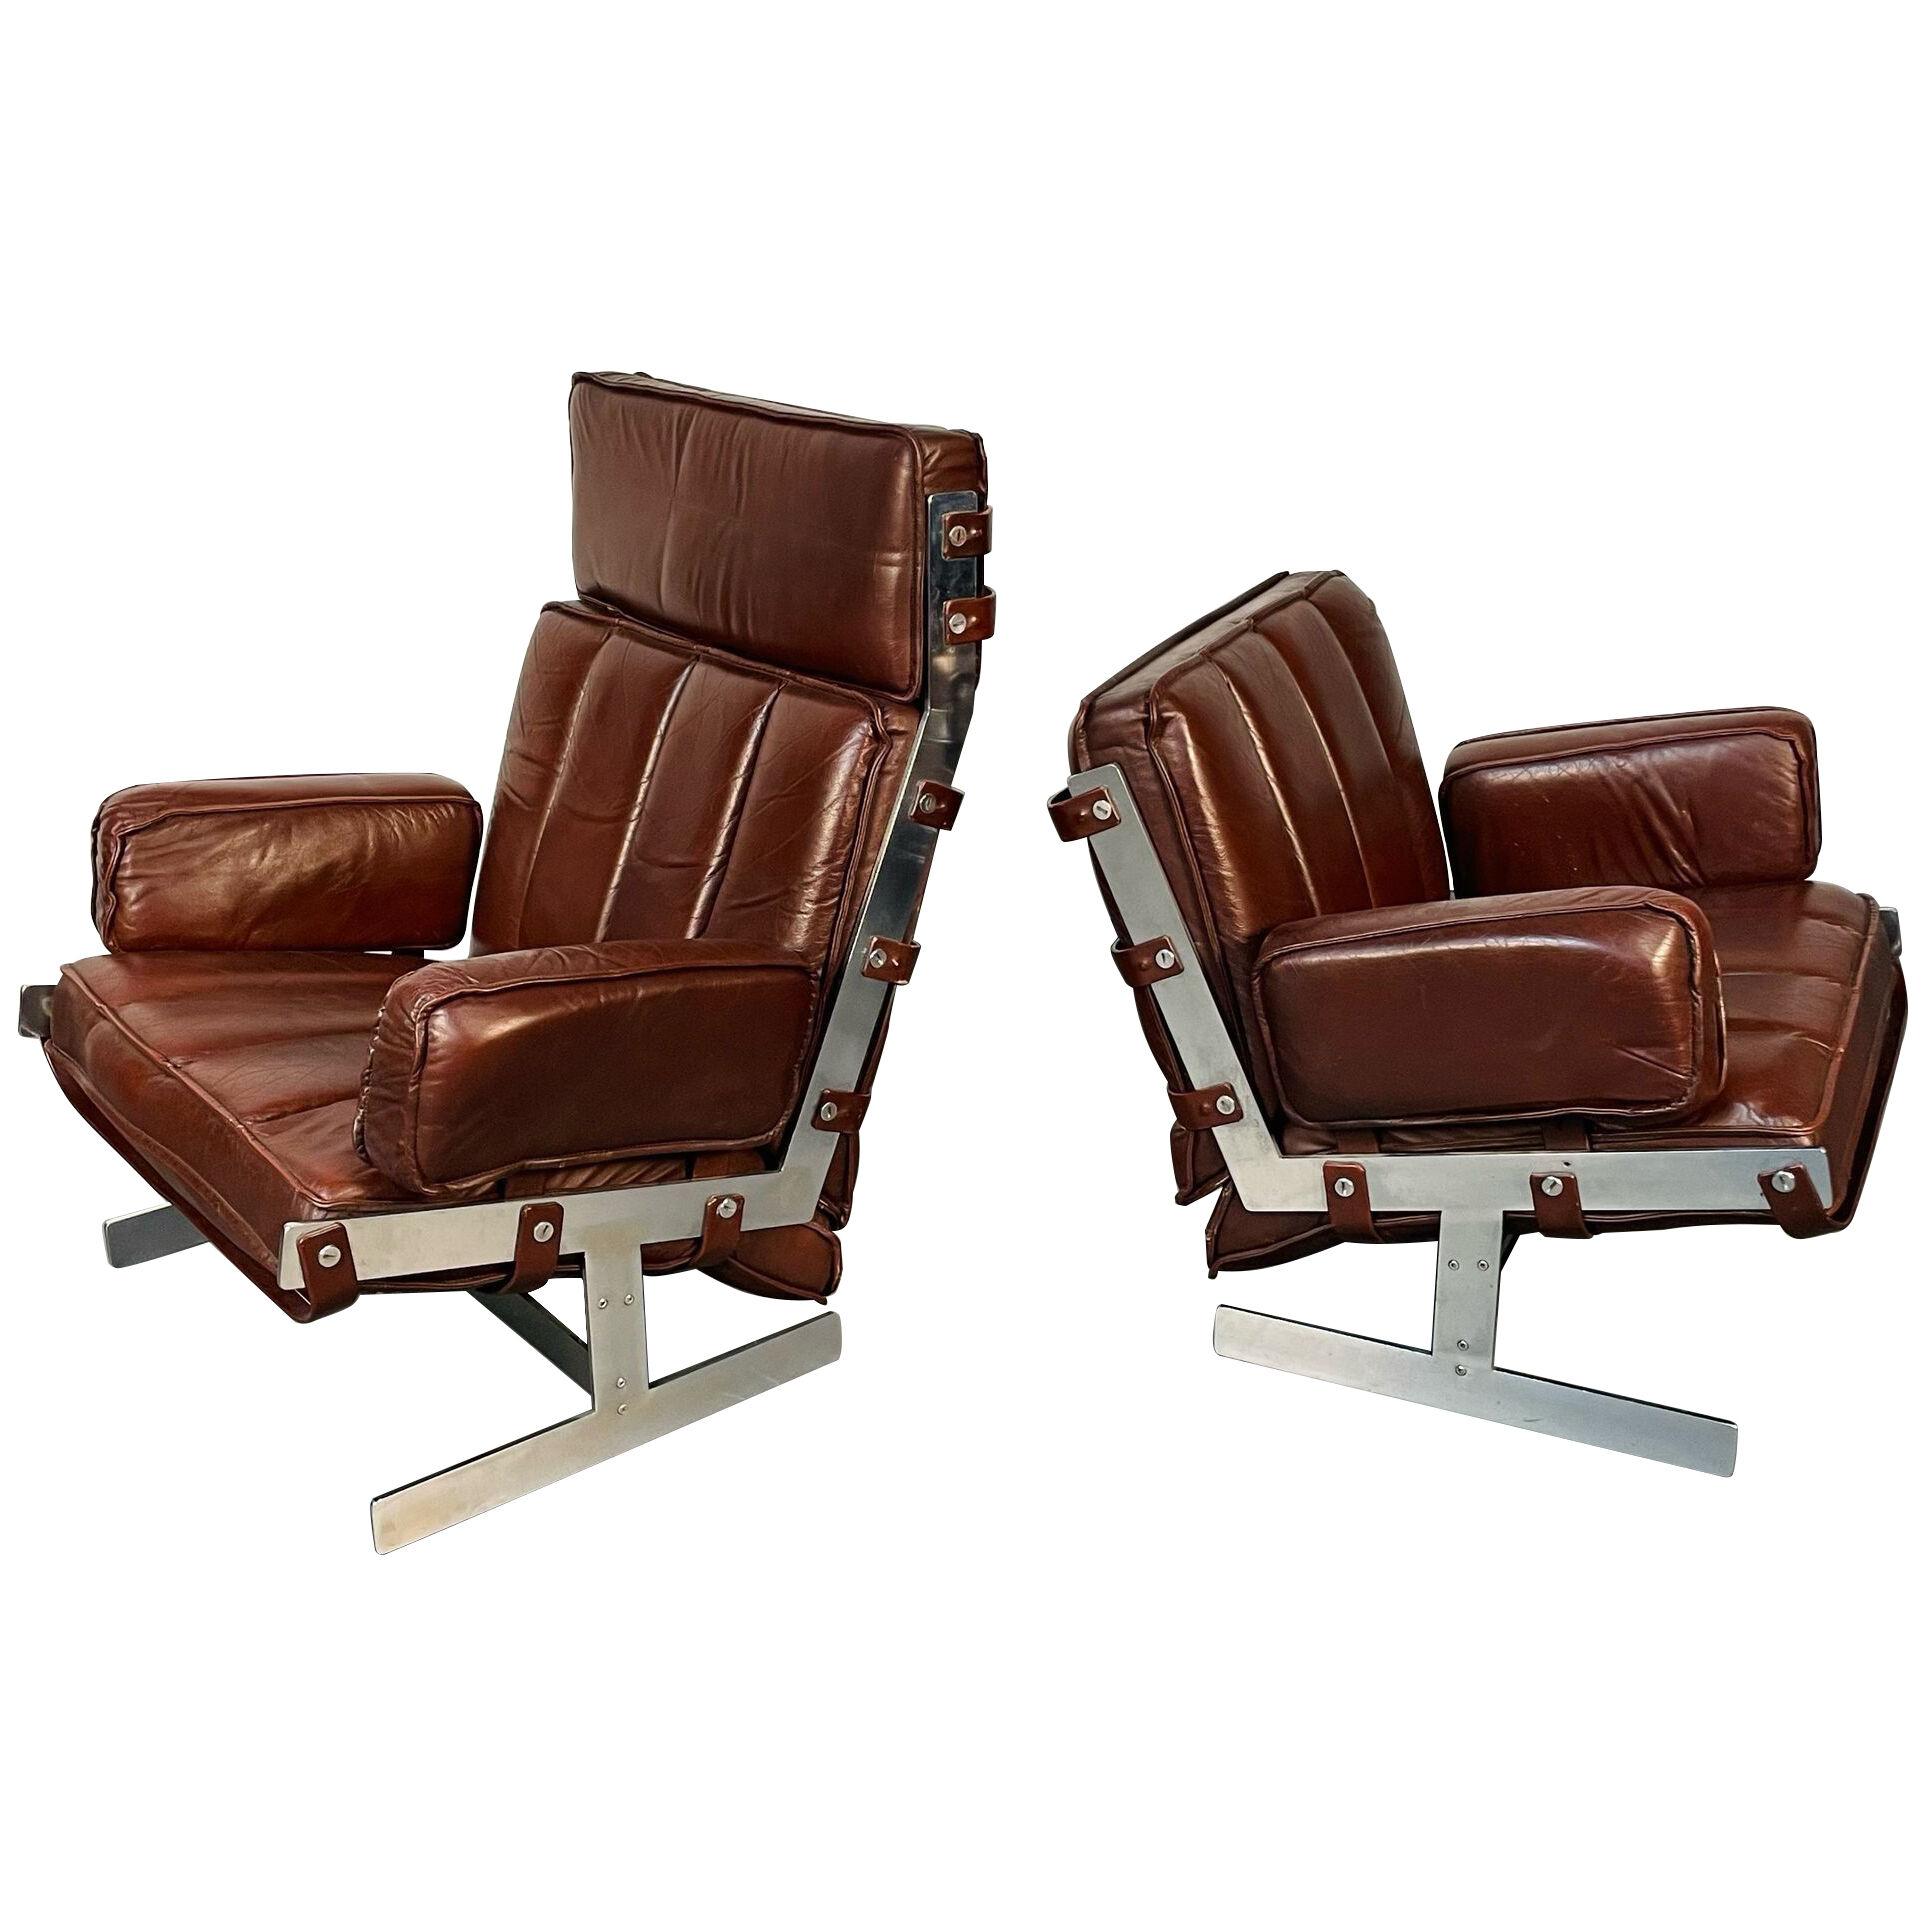 Pair of Swedish Mid-Century Modern Lounge / Club Chairs by Arne Norell, 1960s